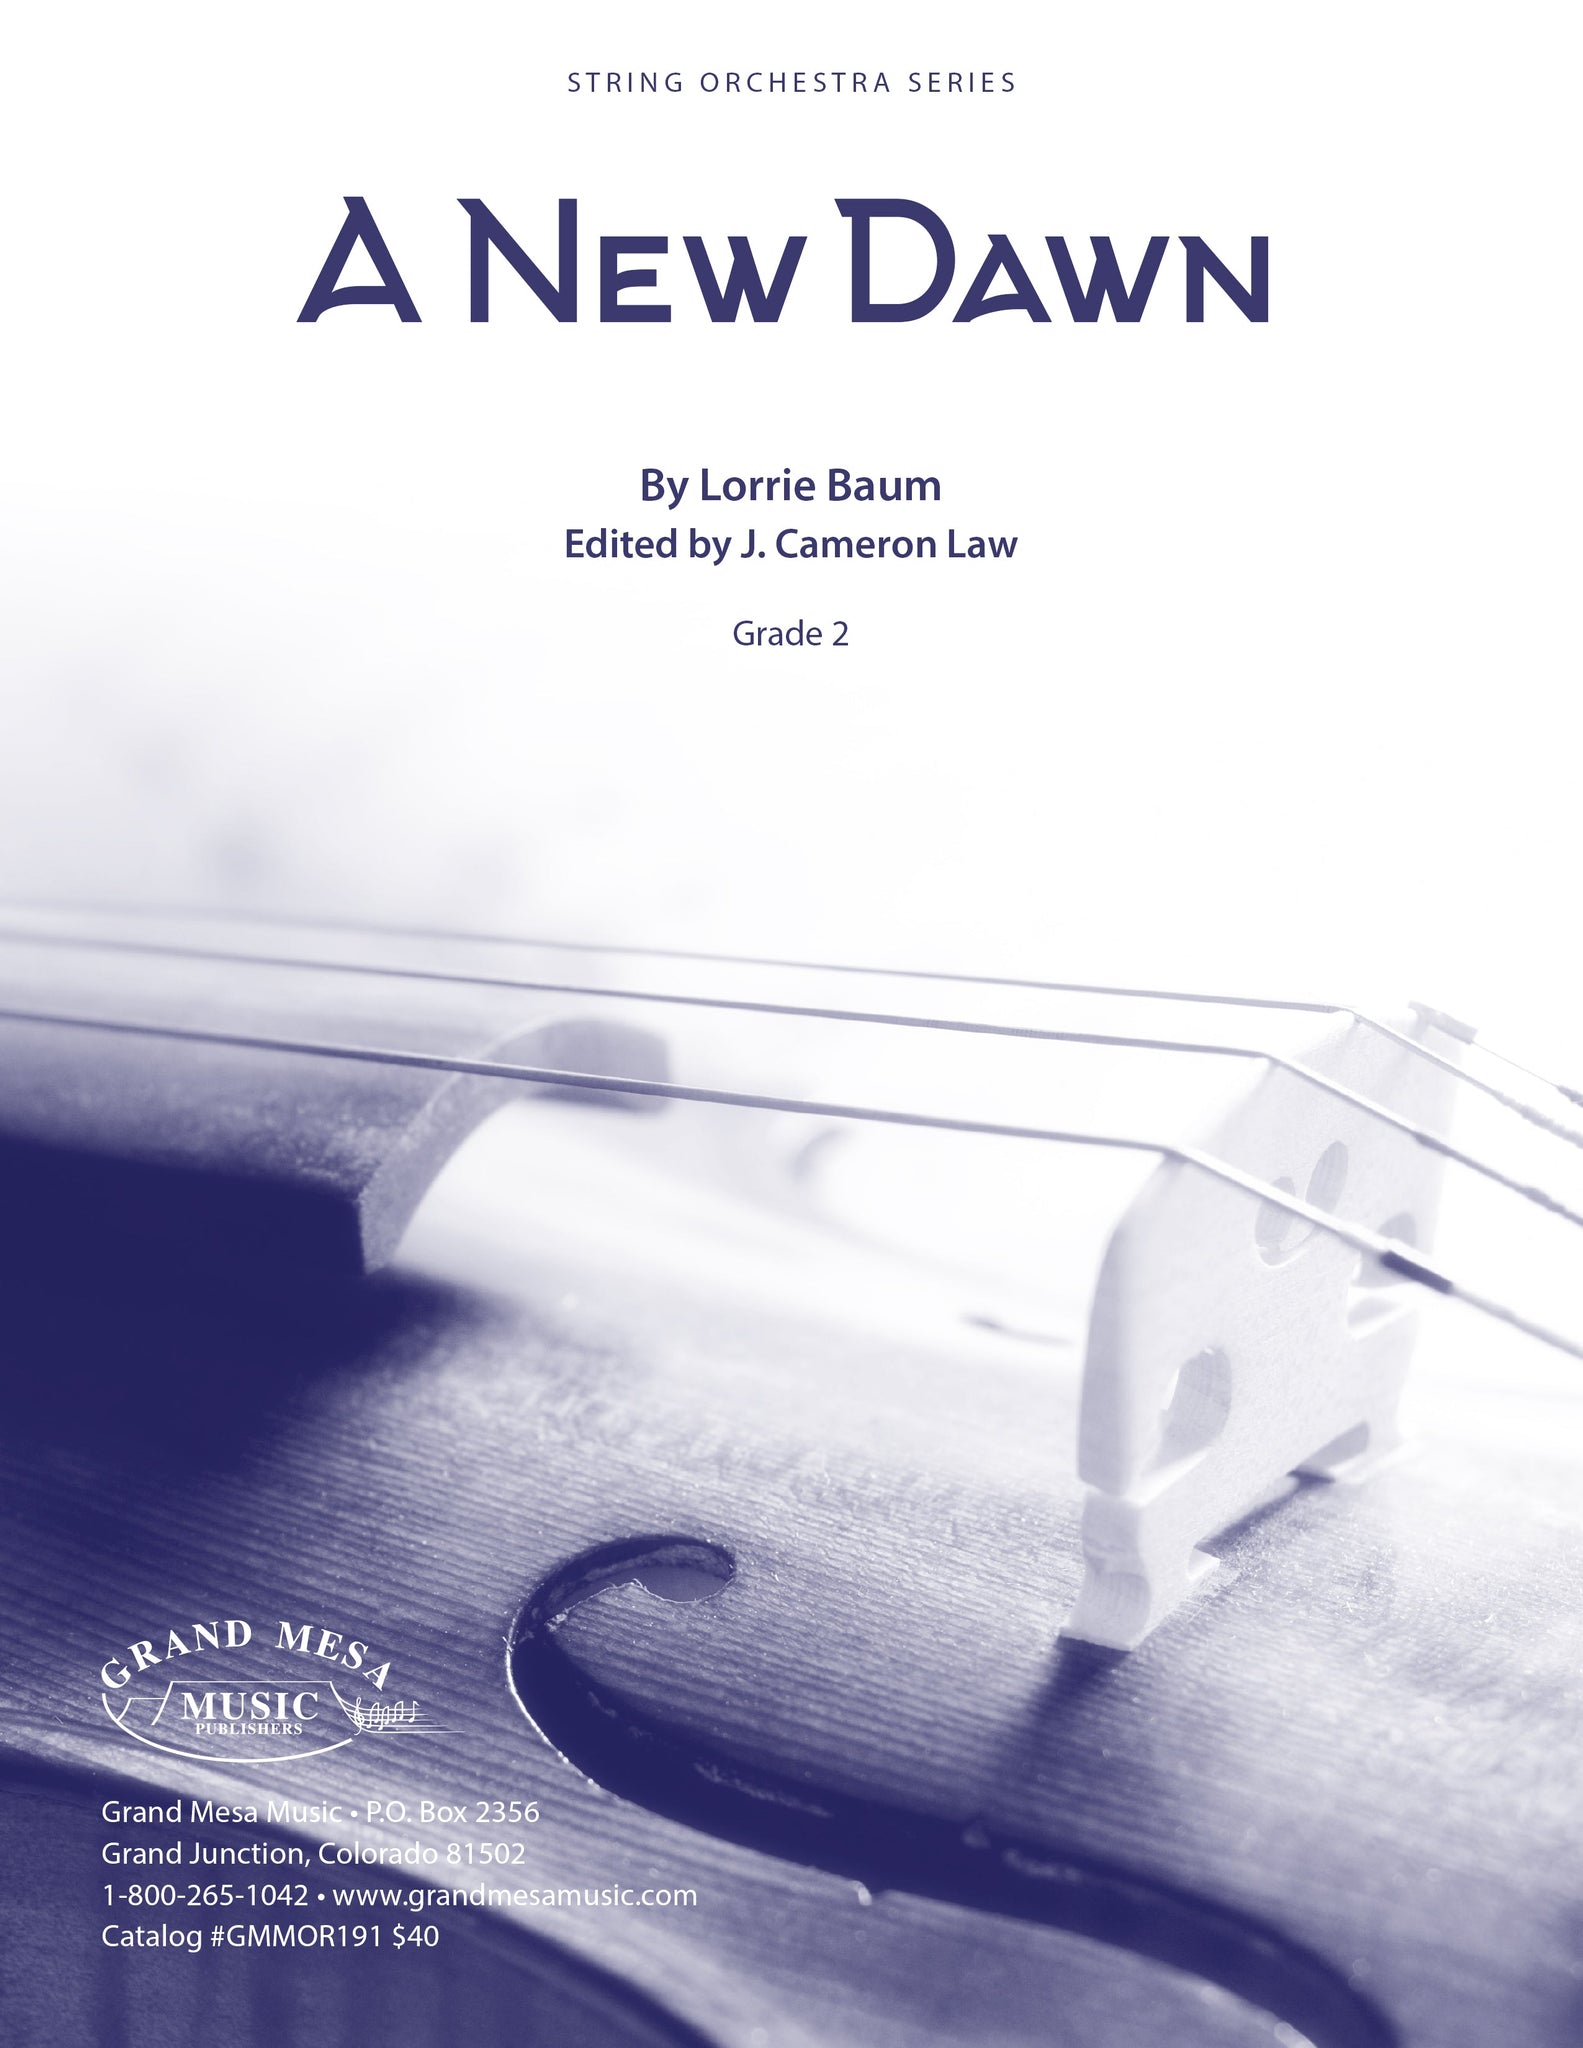 Strings sheet music cover of A New Dawn, composed by Lorrie Baum.